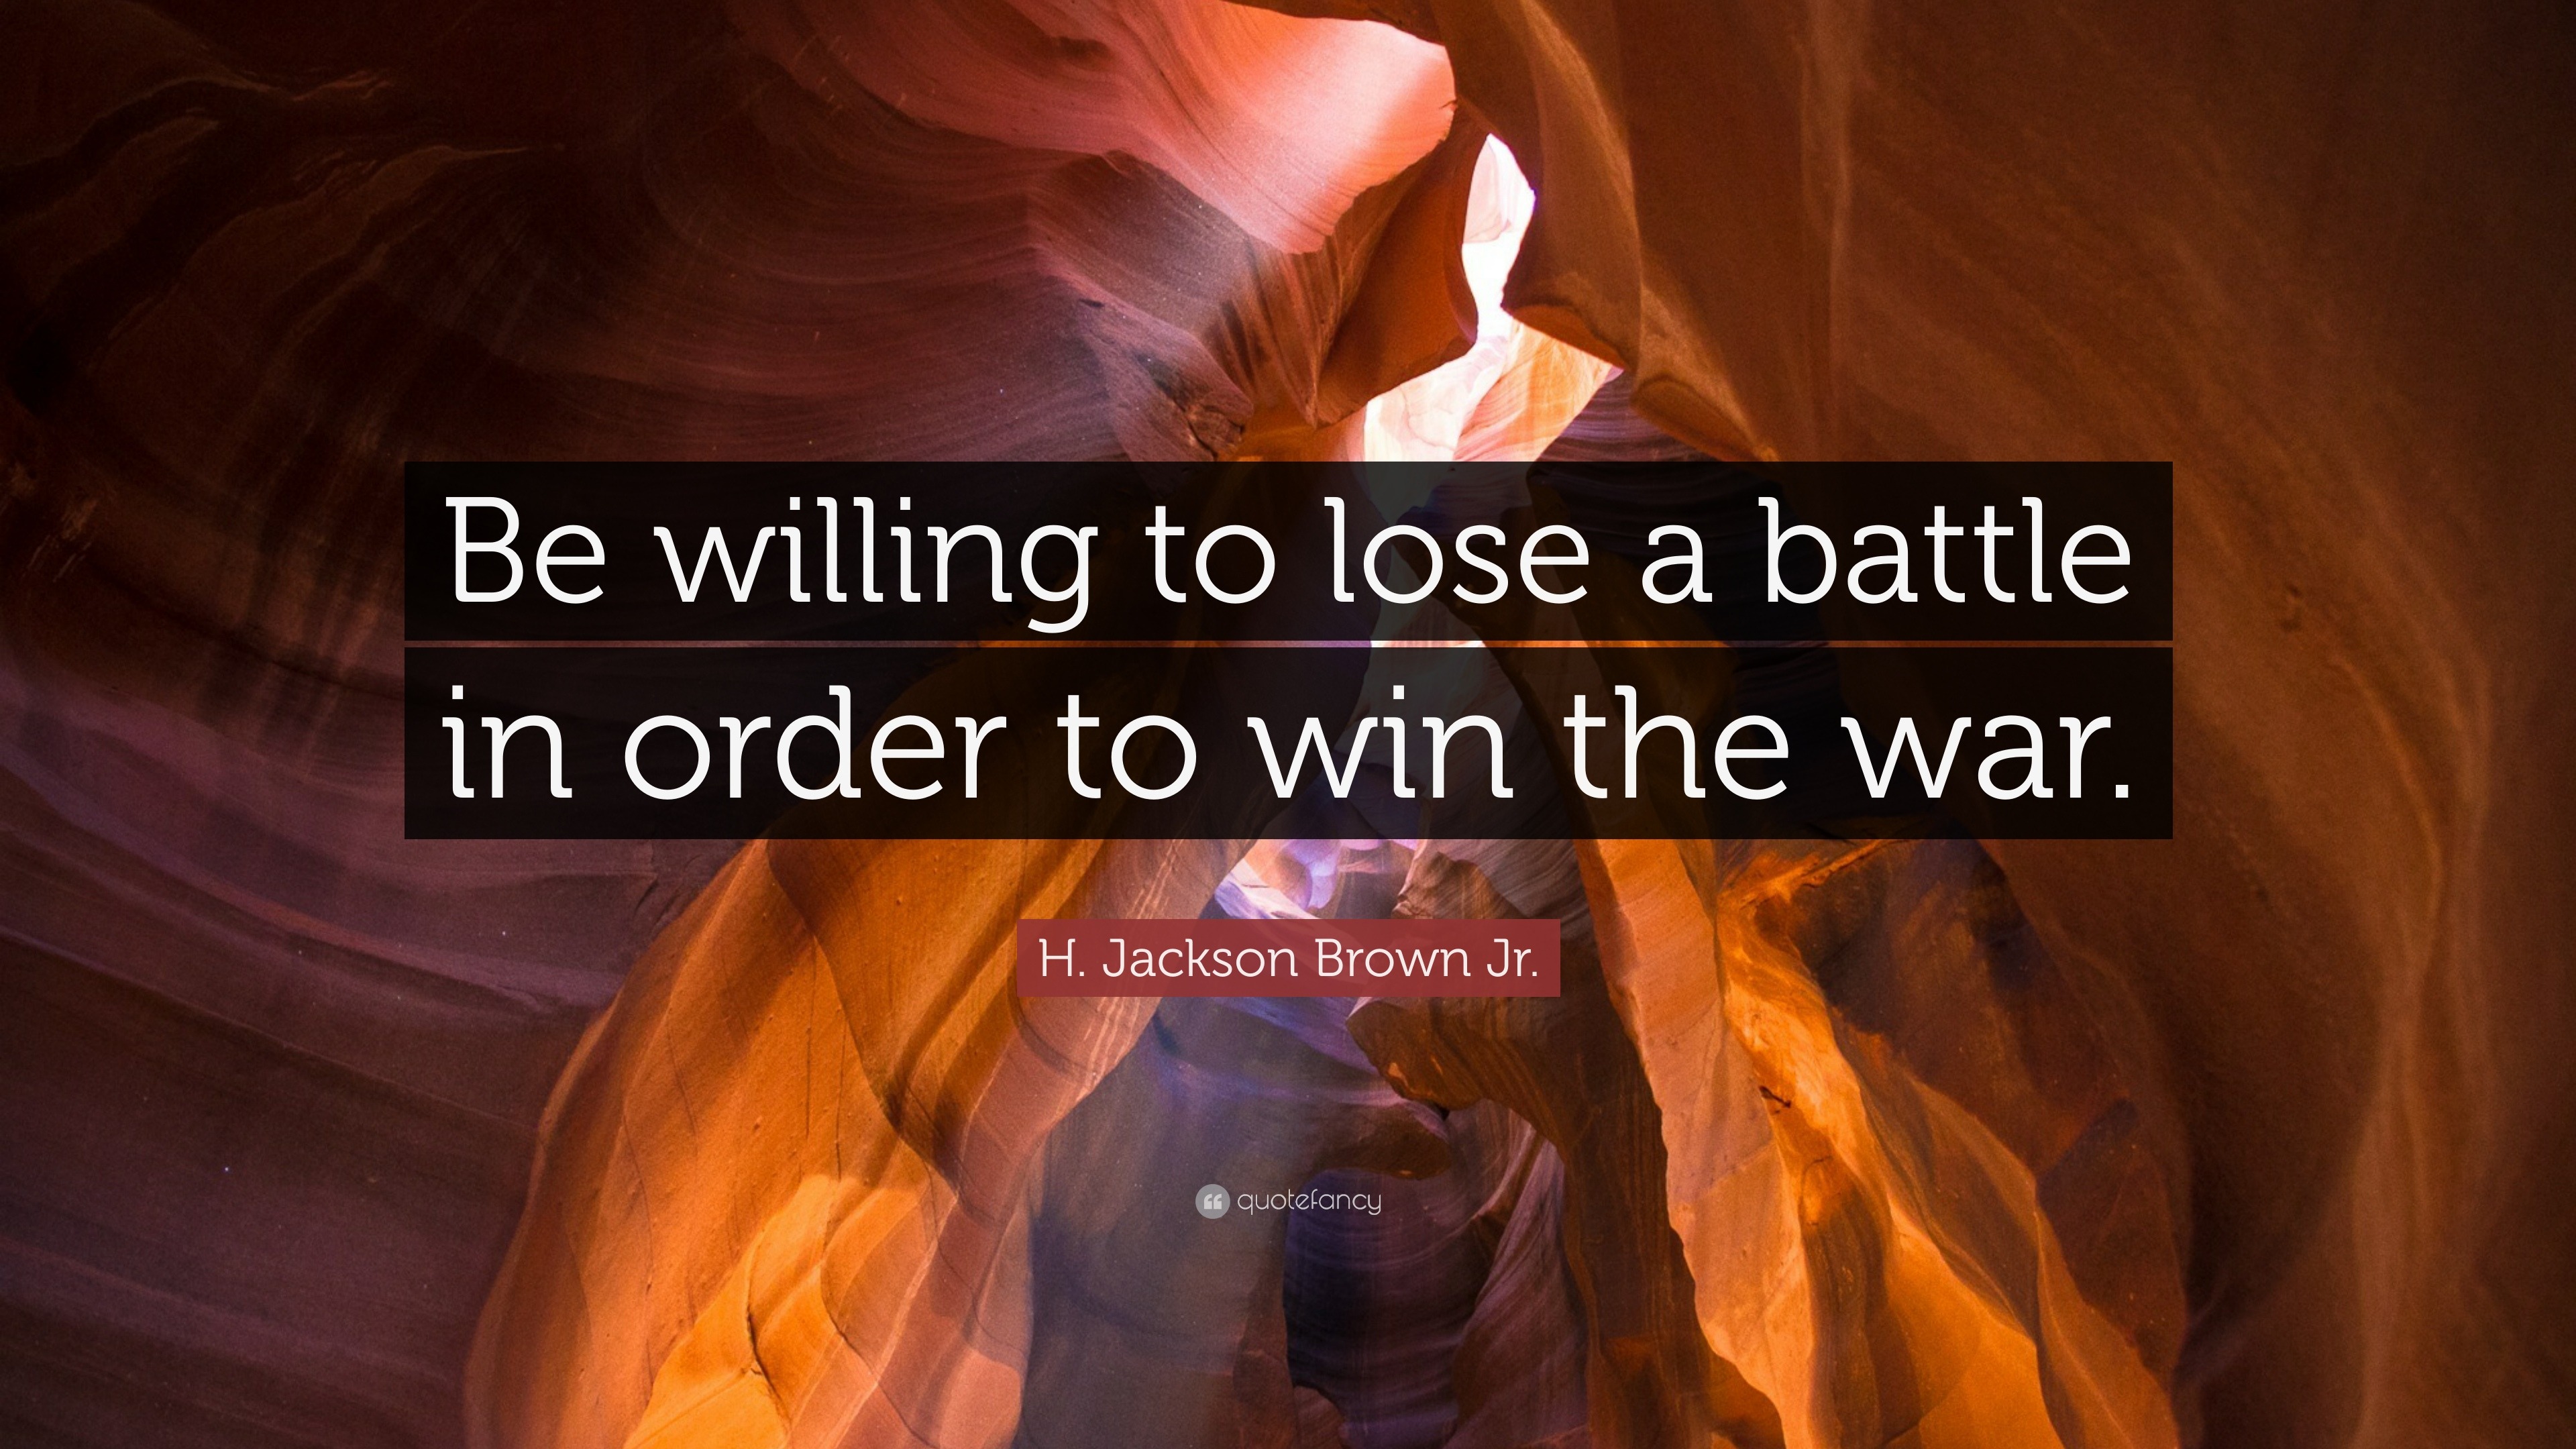 H Jackson Brown Jr Quote “be Willing To Lose A Battle In Order To